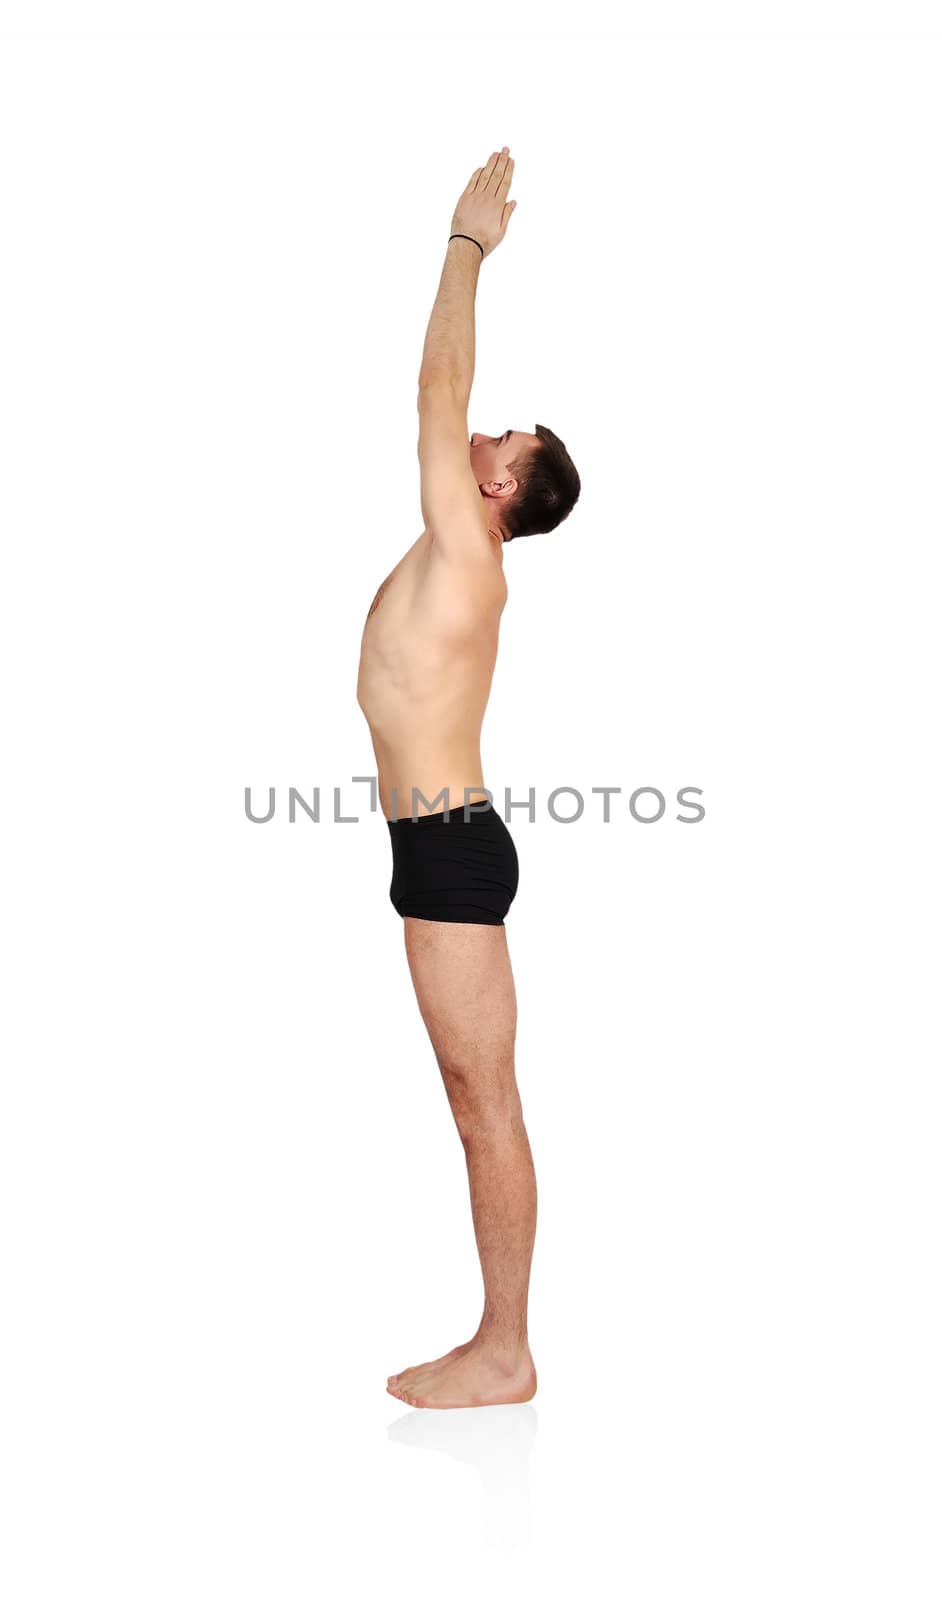 man practicing yoga in position by vetkit